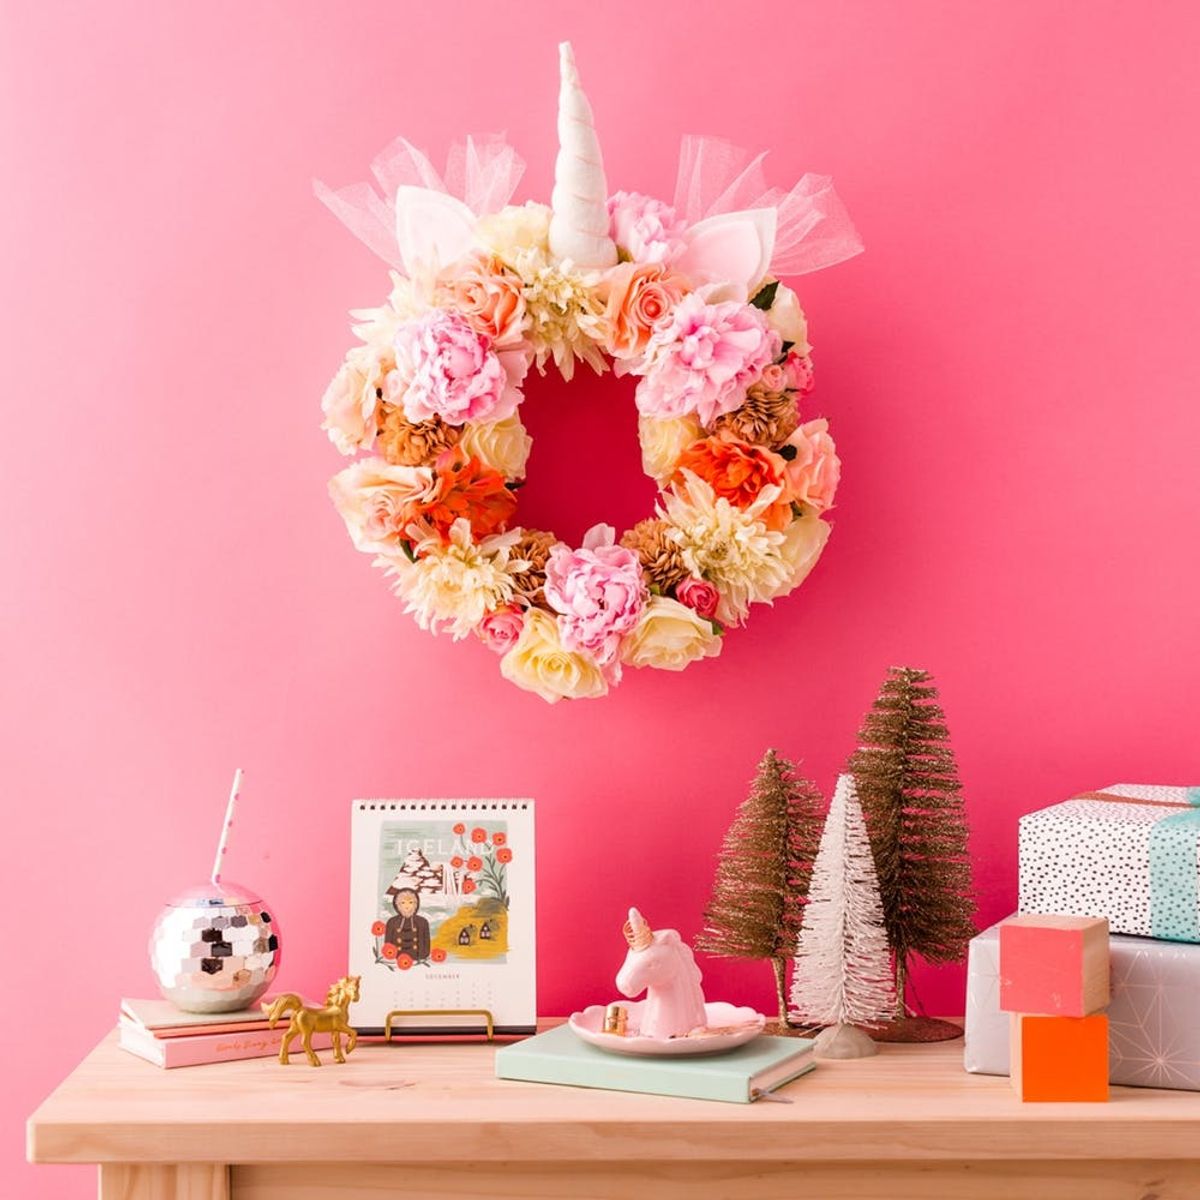 Make Your Dreams Come True With This DIY Floral Unicorn Christmas Wreath